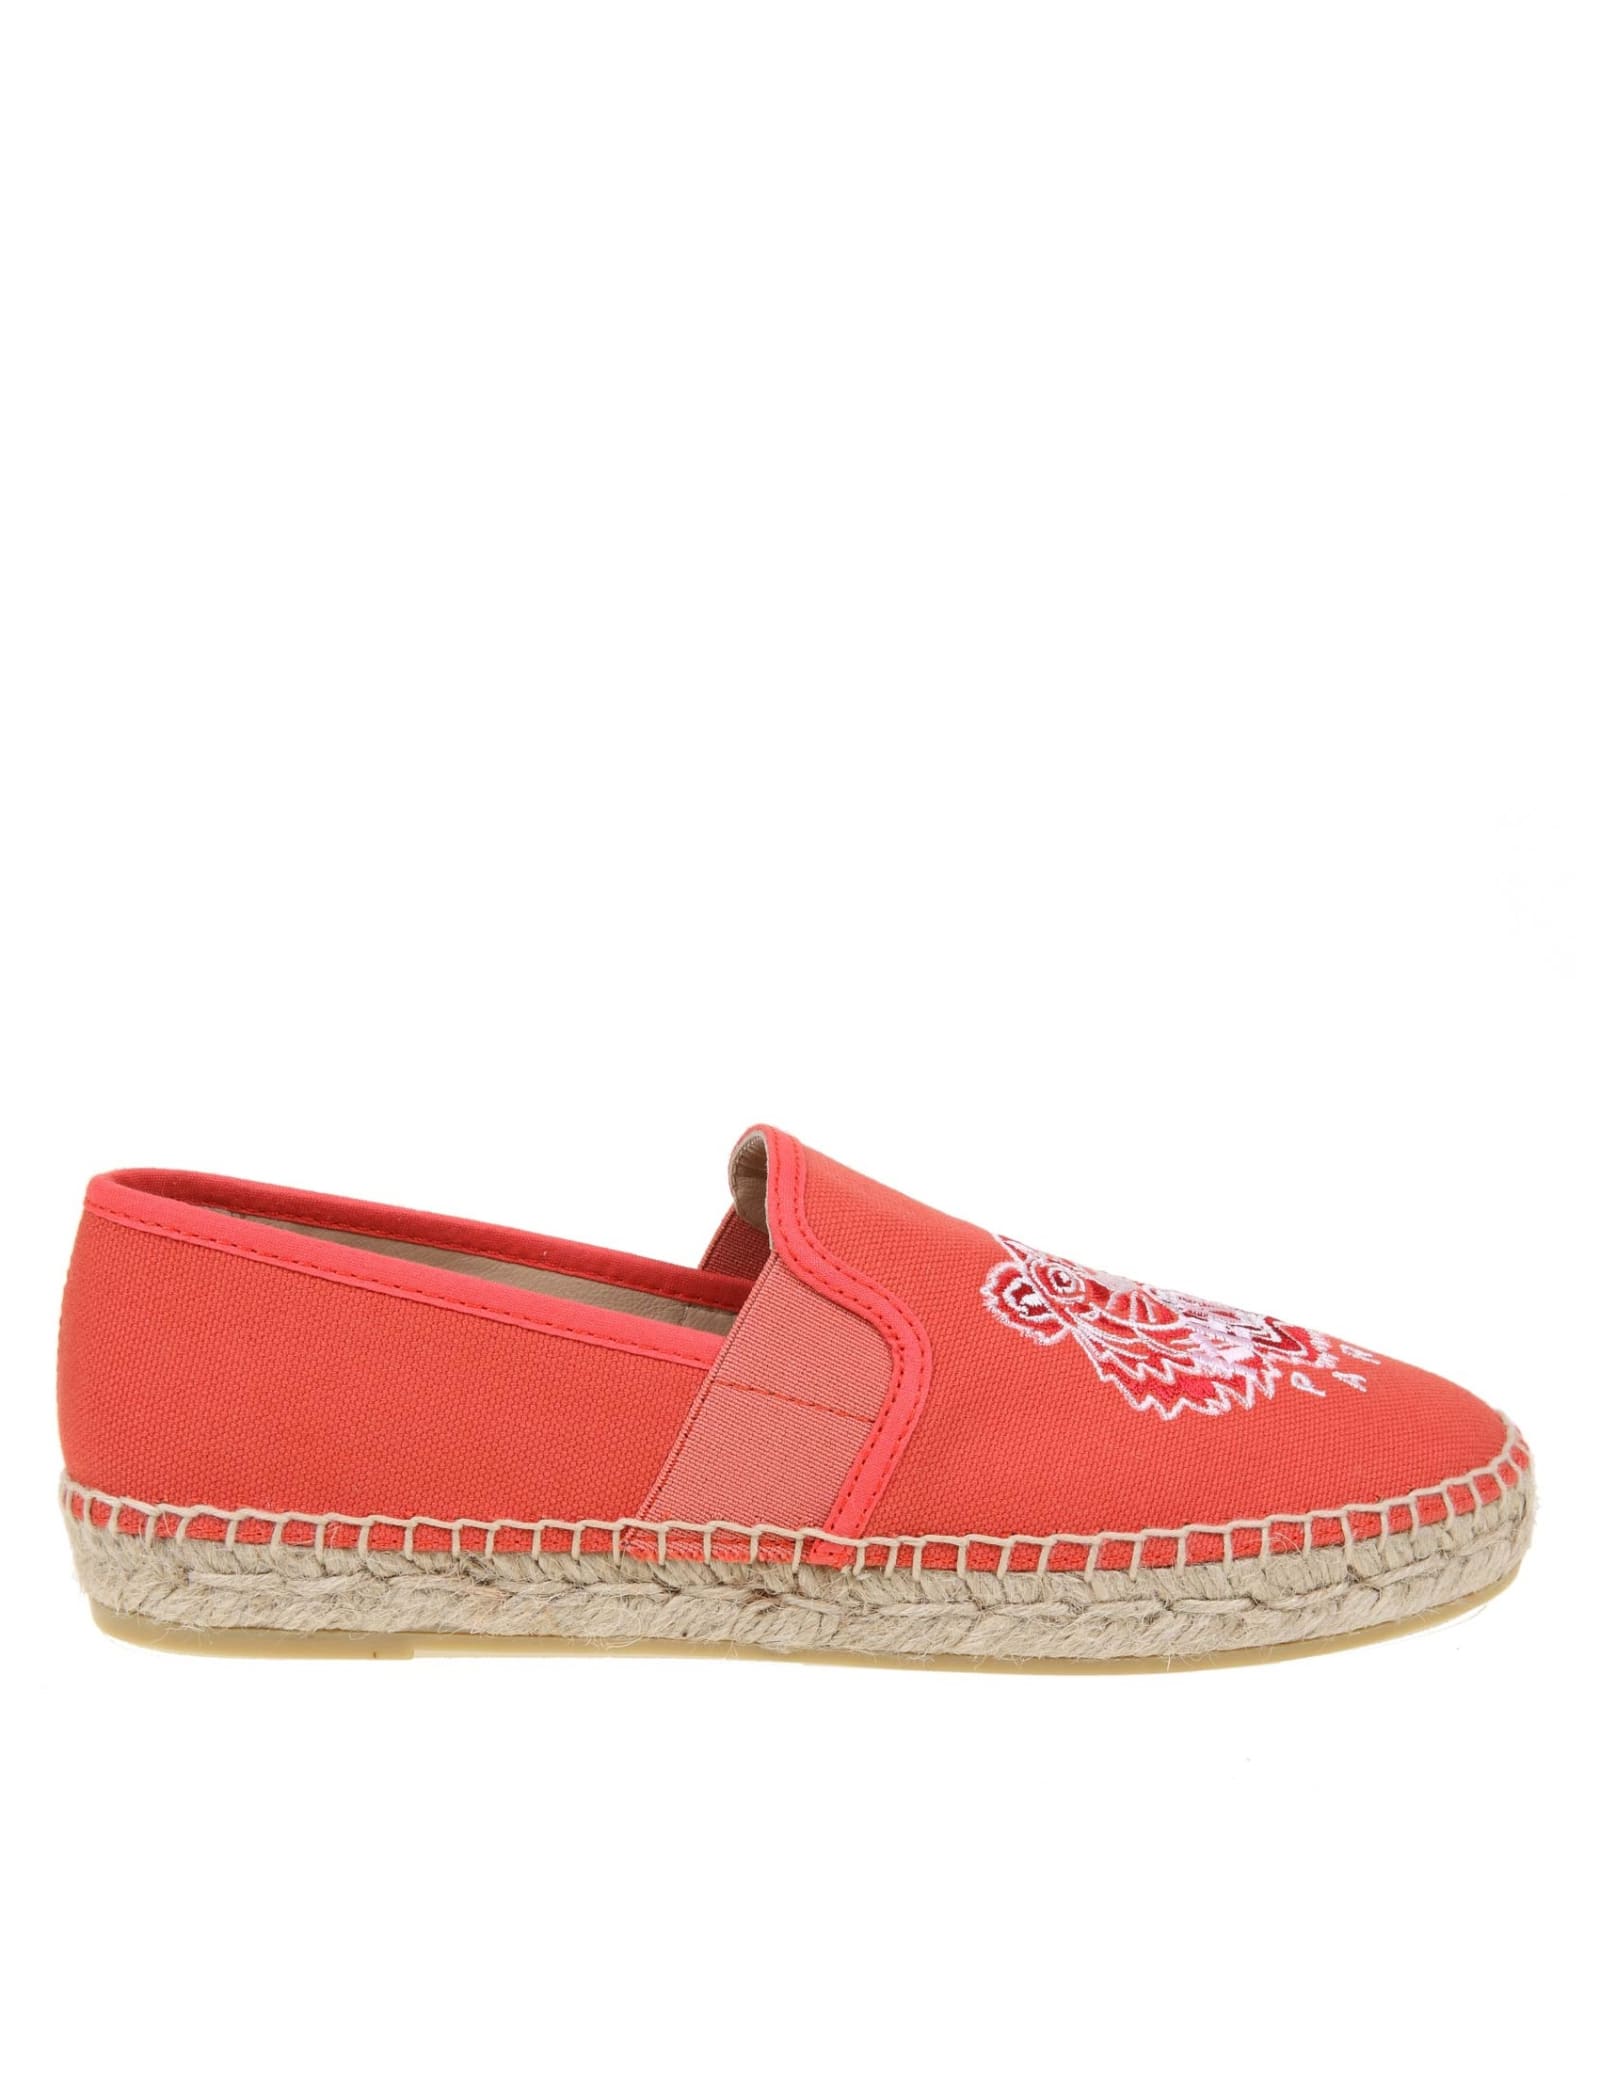 Buy Kenzo Espadrille Tiger In Red Fabric online, shop Kenzo shoes with free shipping